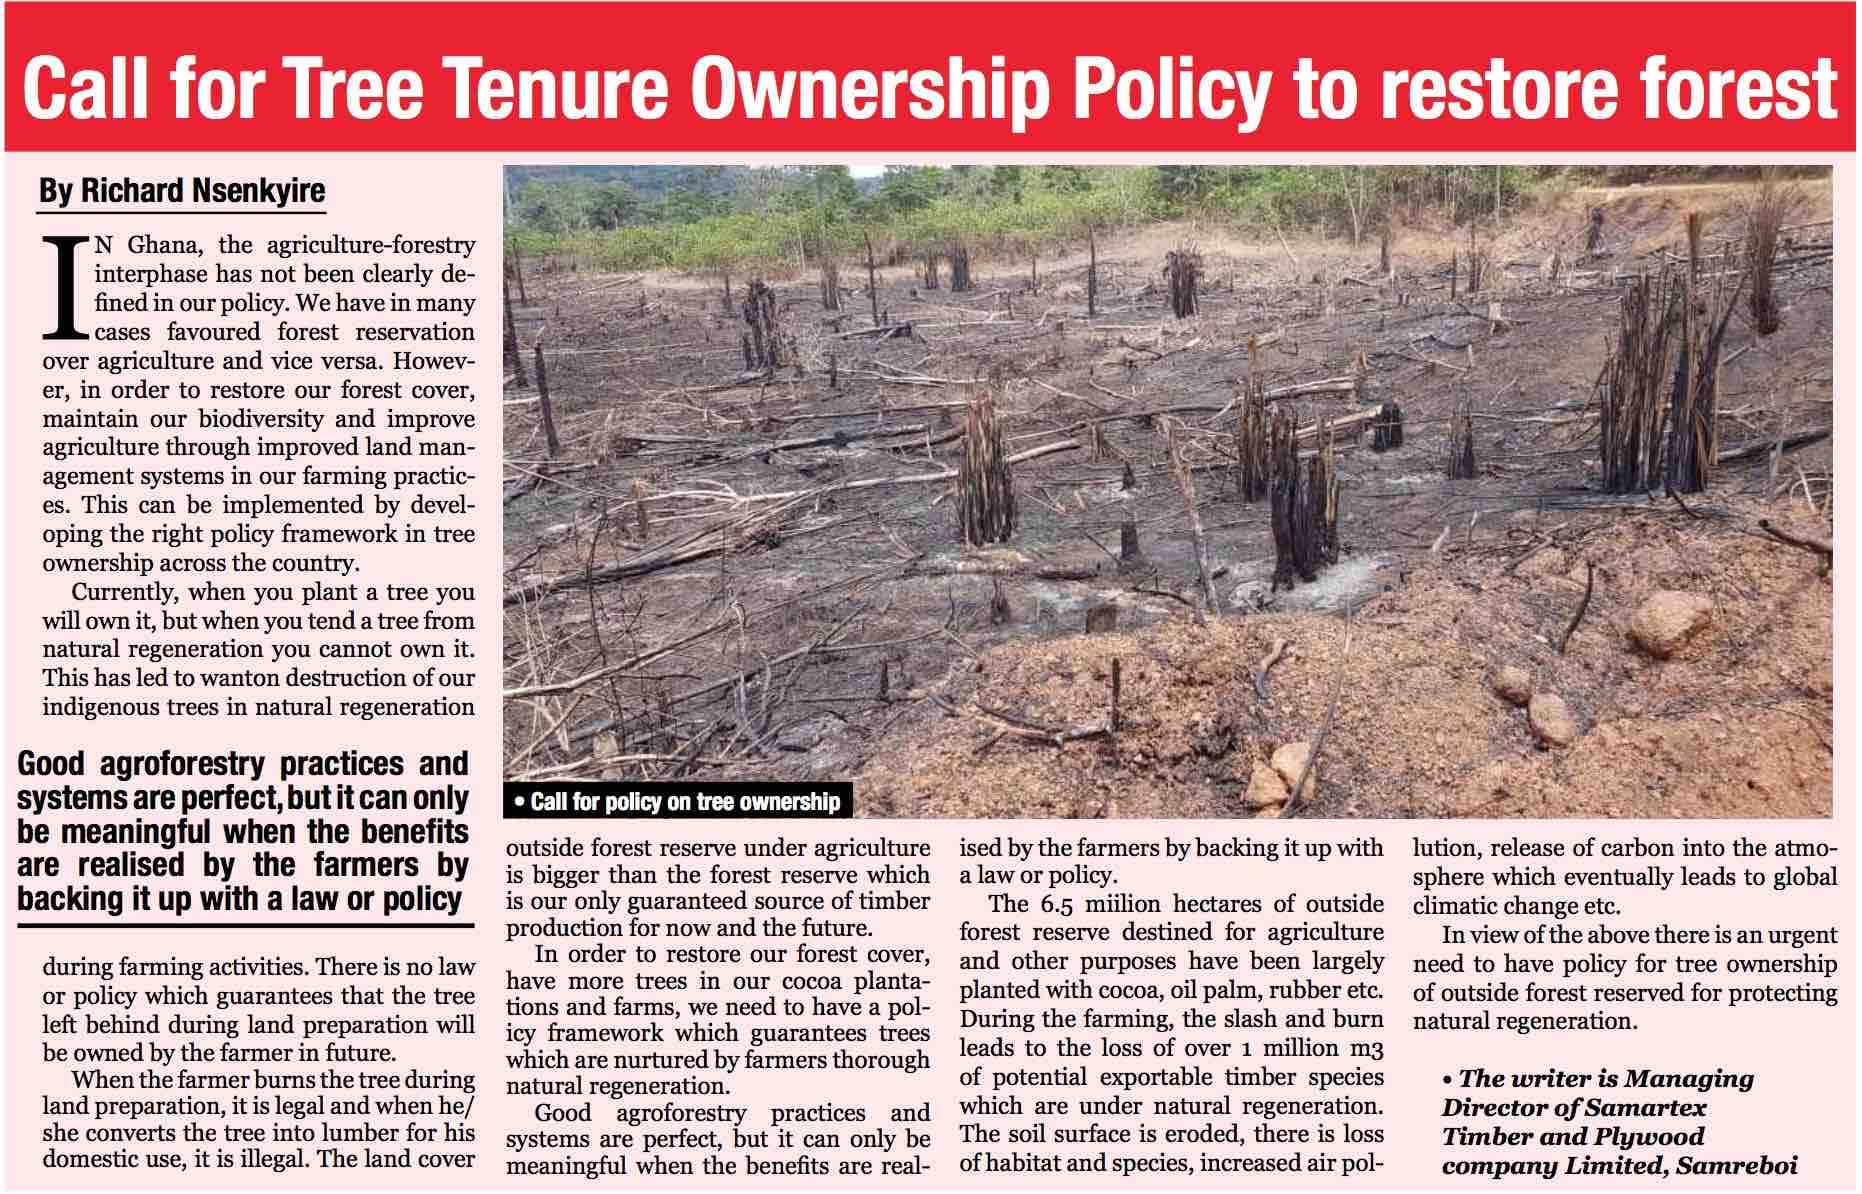 Call for Tree Tenure Ownership Policy to Restore Forest 